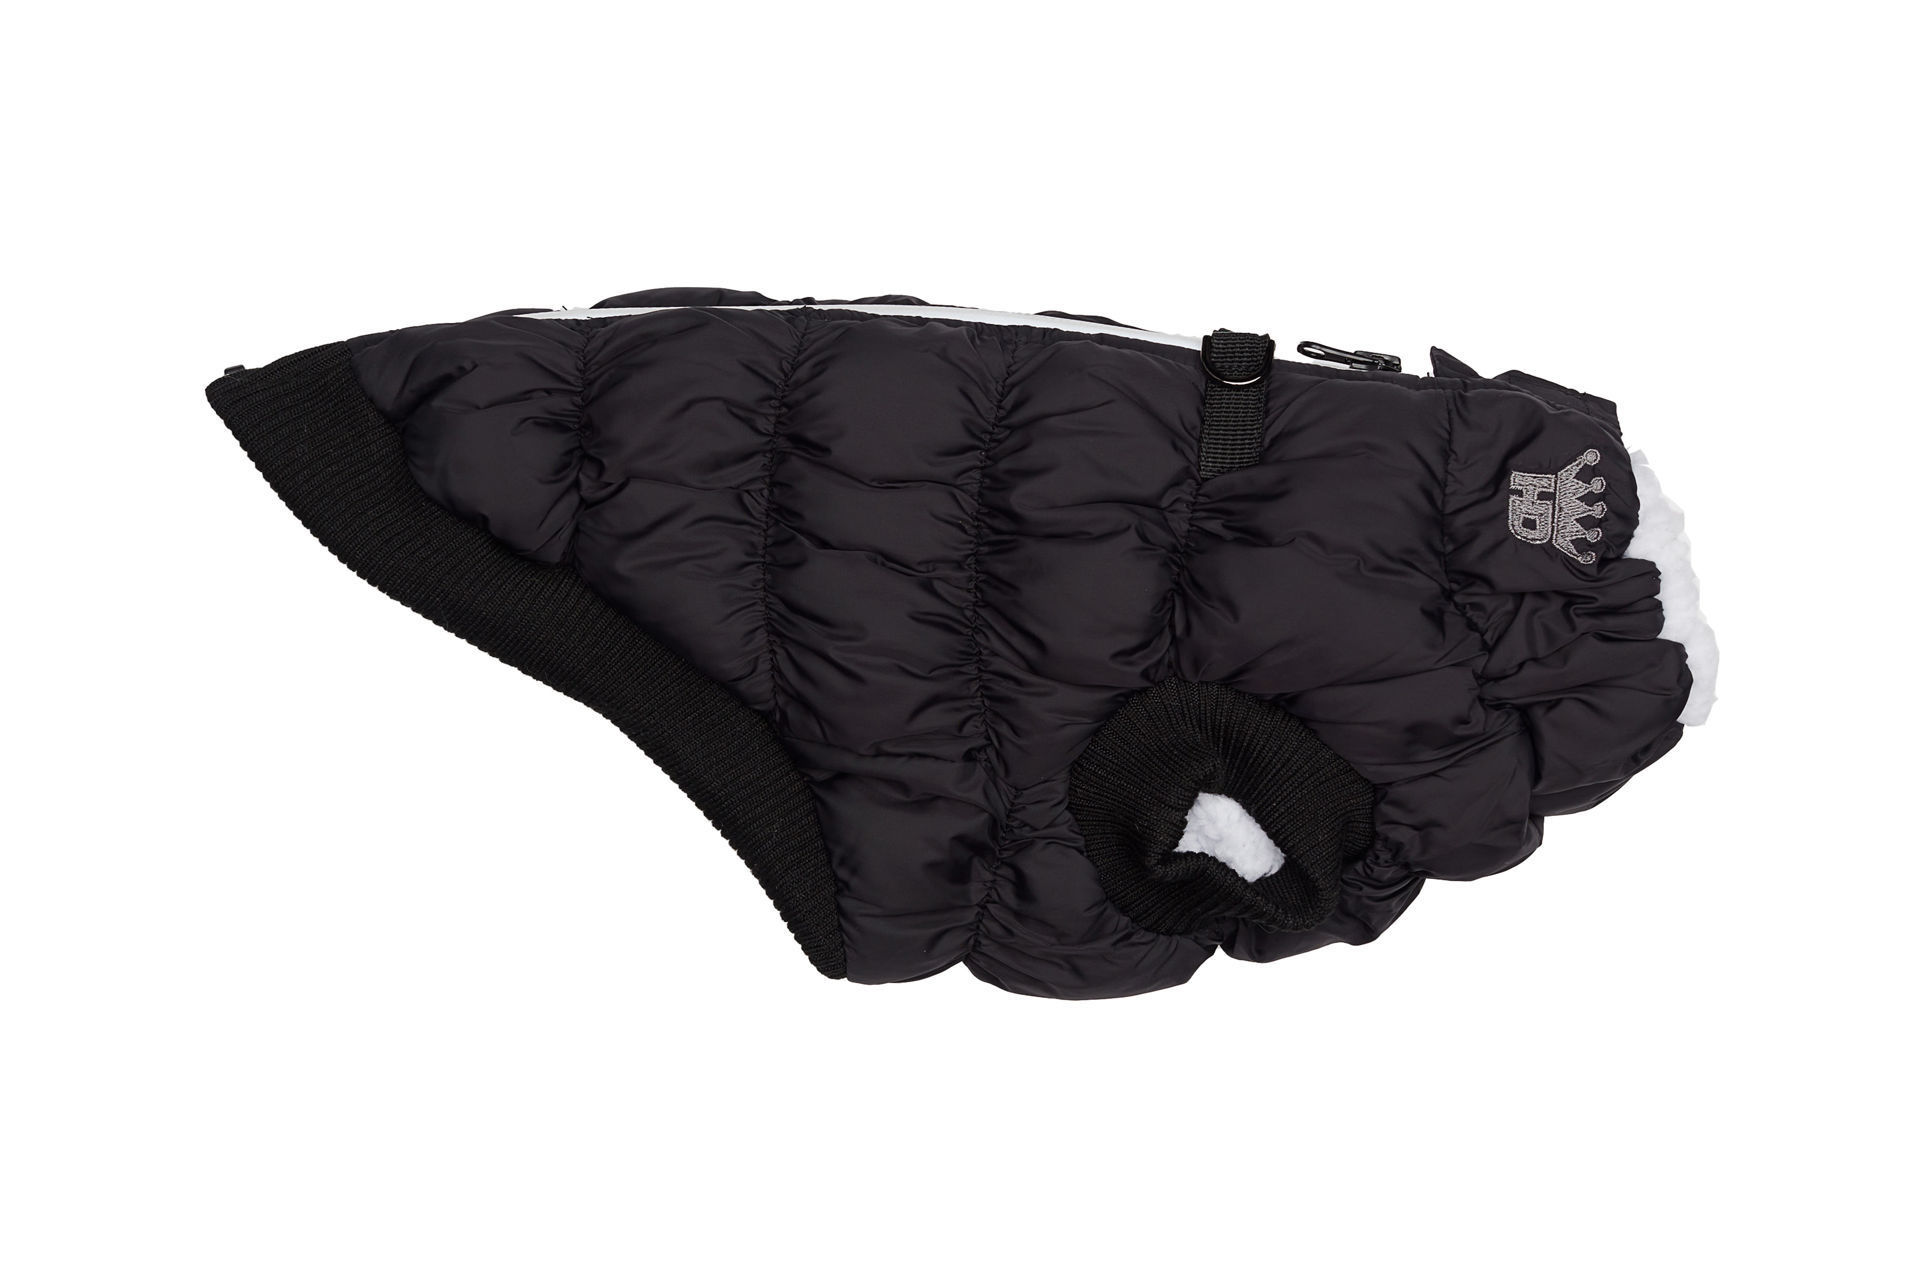 Picture of HD Crown Puffer Vest - Black